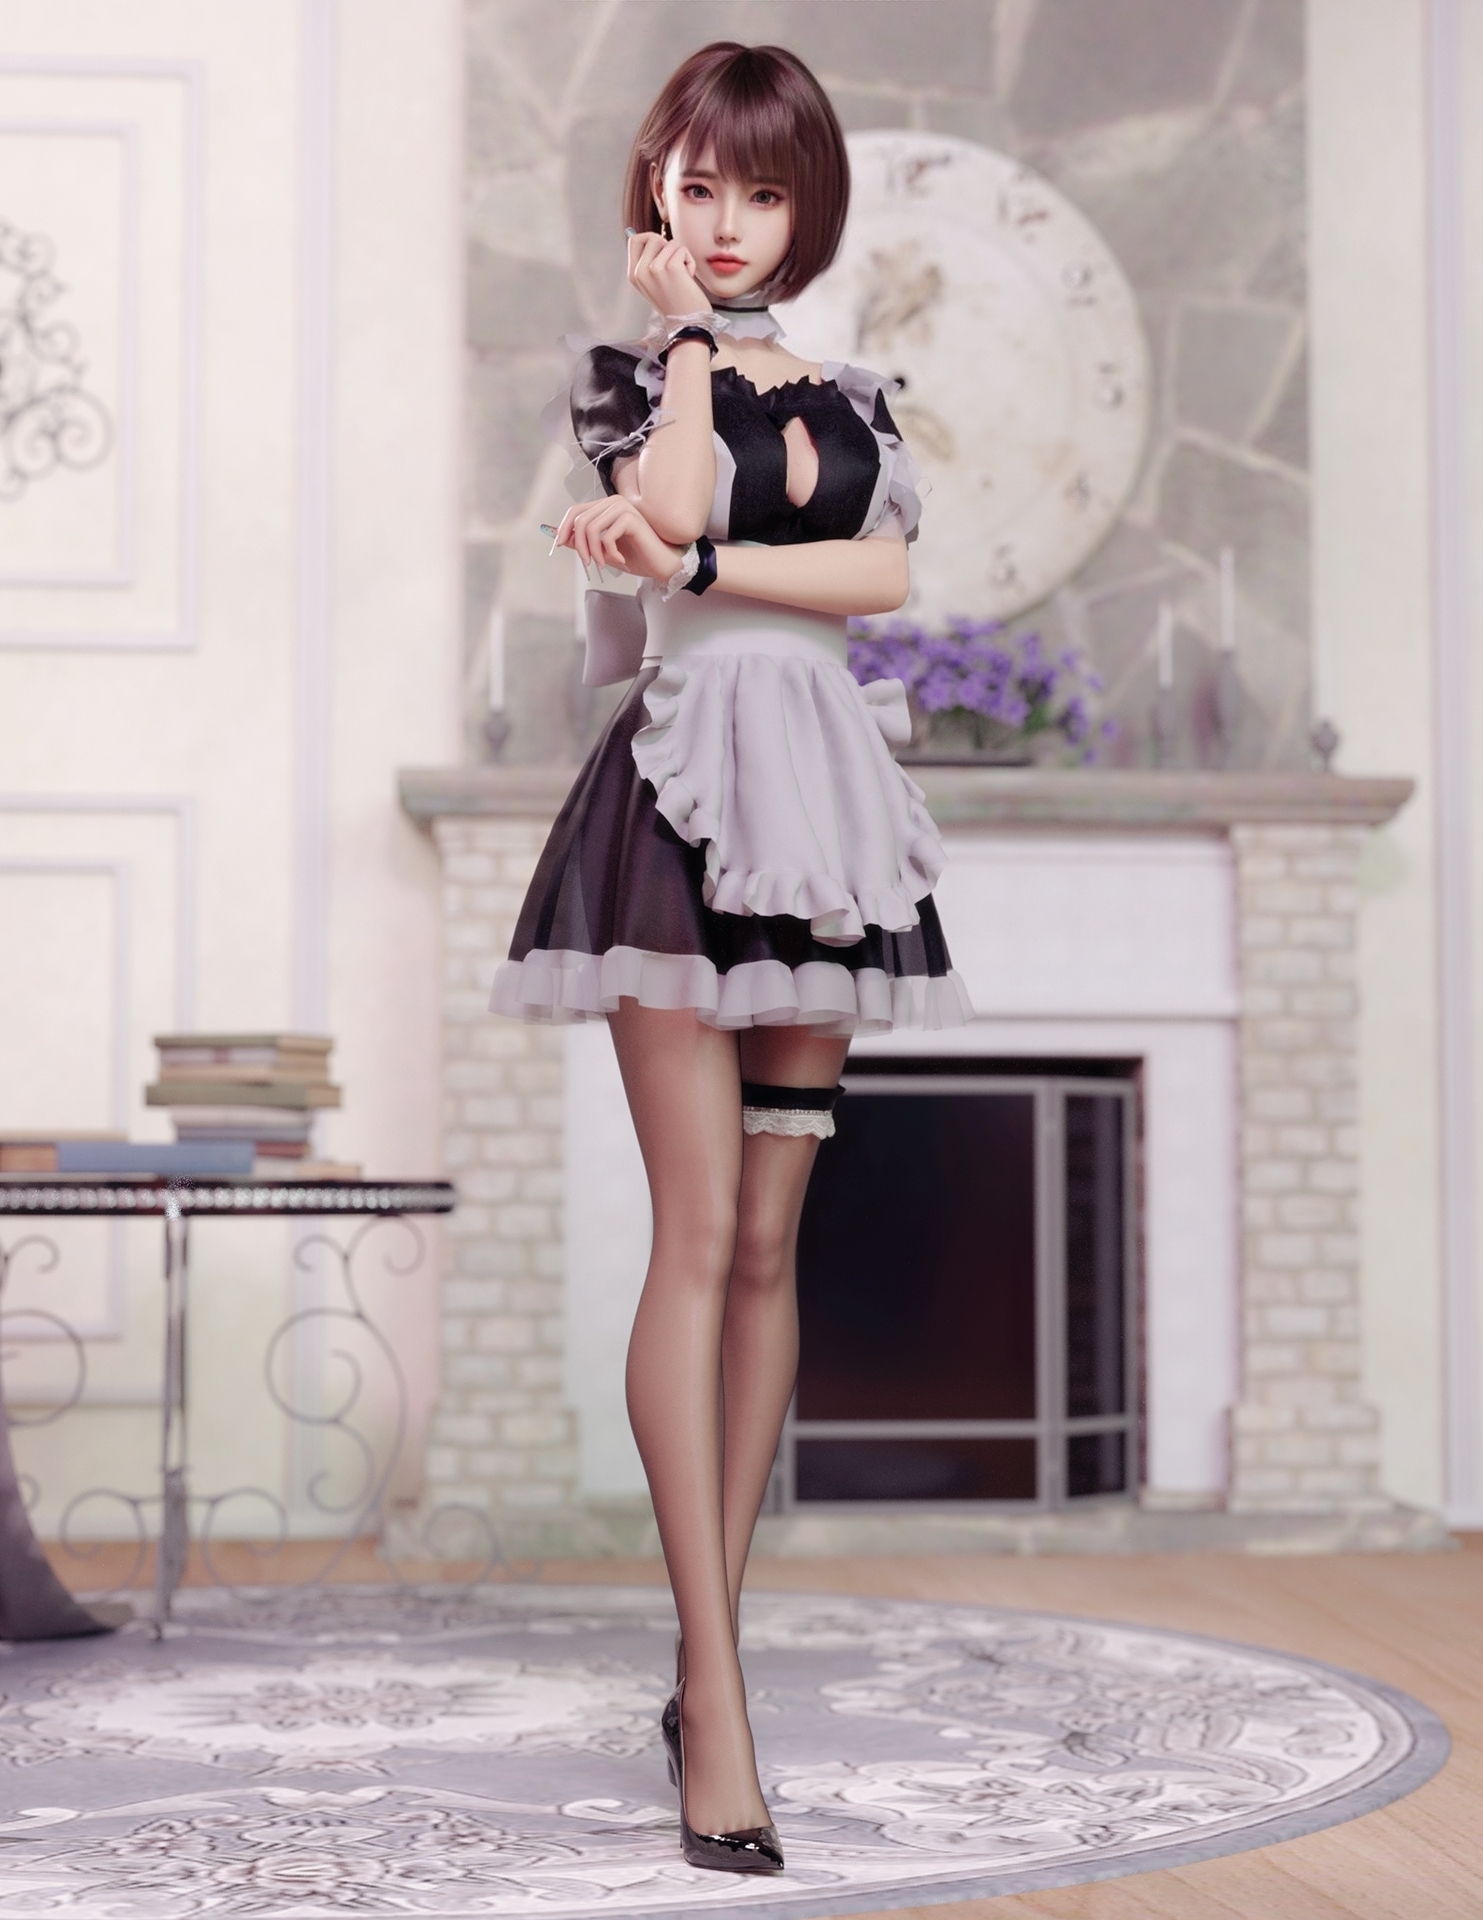 Fantasy Girl High Heels Maid Outfit 3D Luck Zs 1483x1920